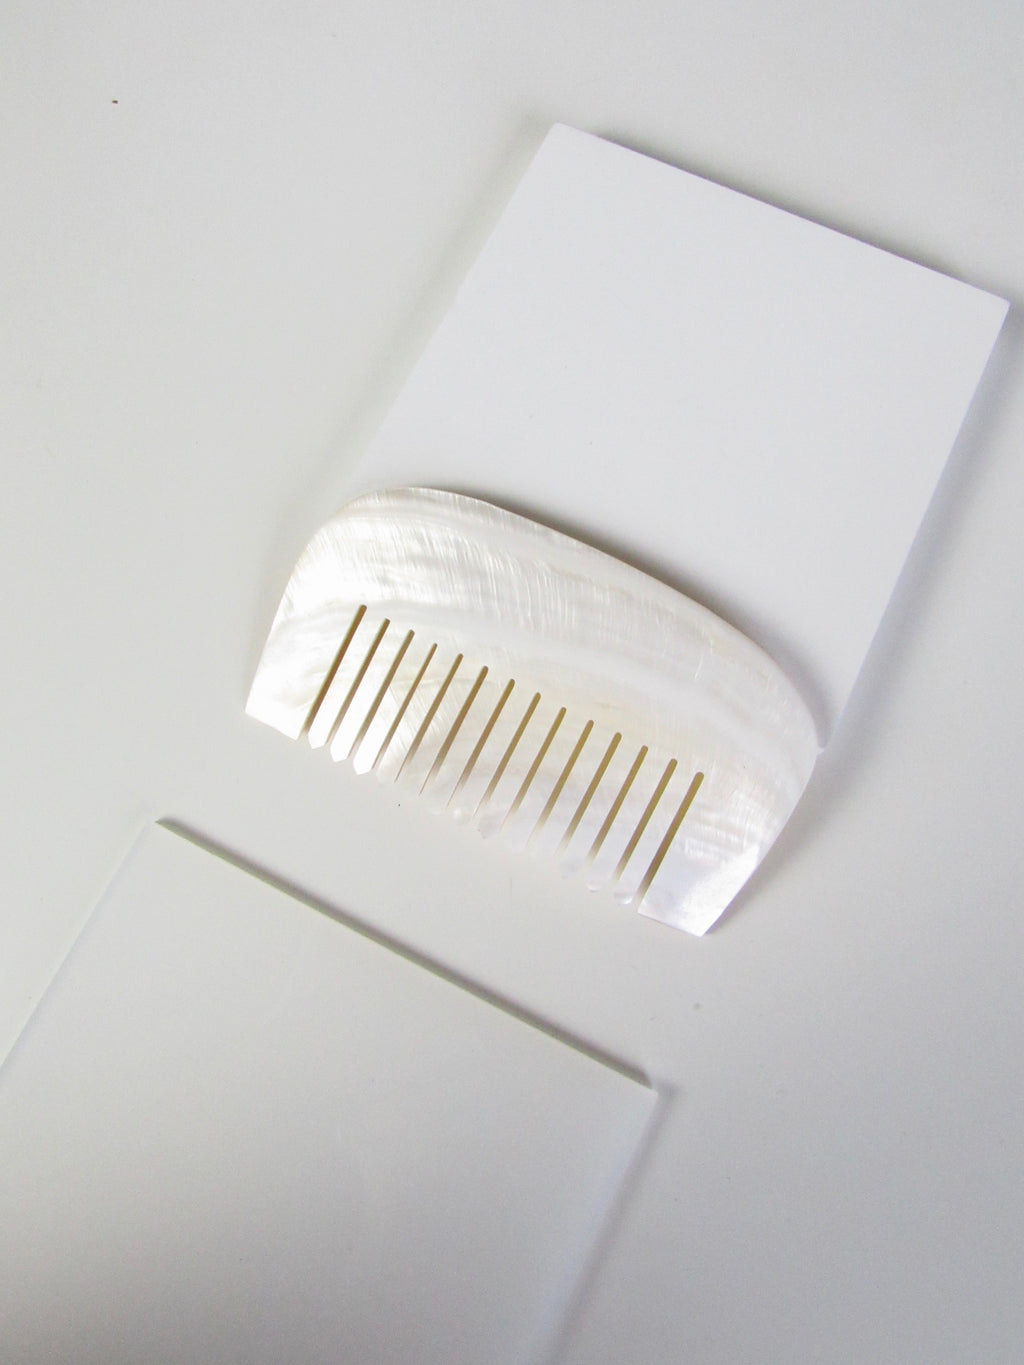 Rounded Natural Seashell Comb